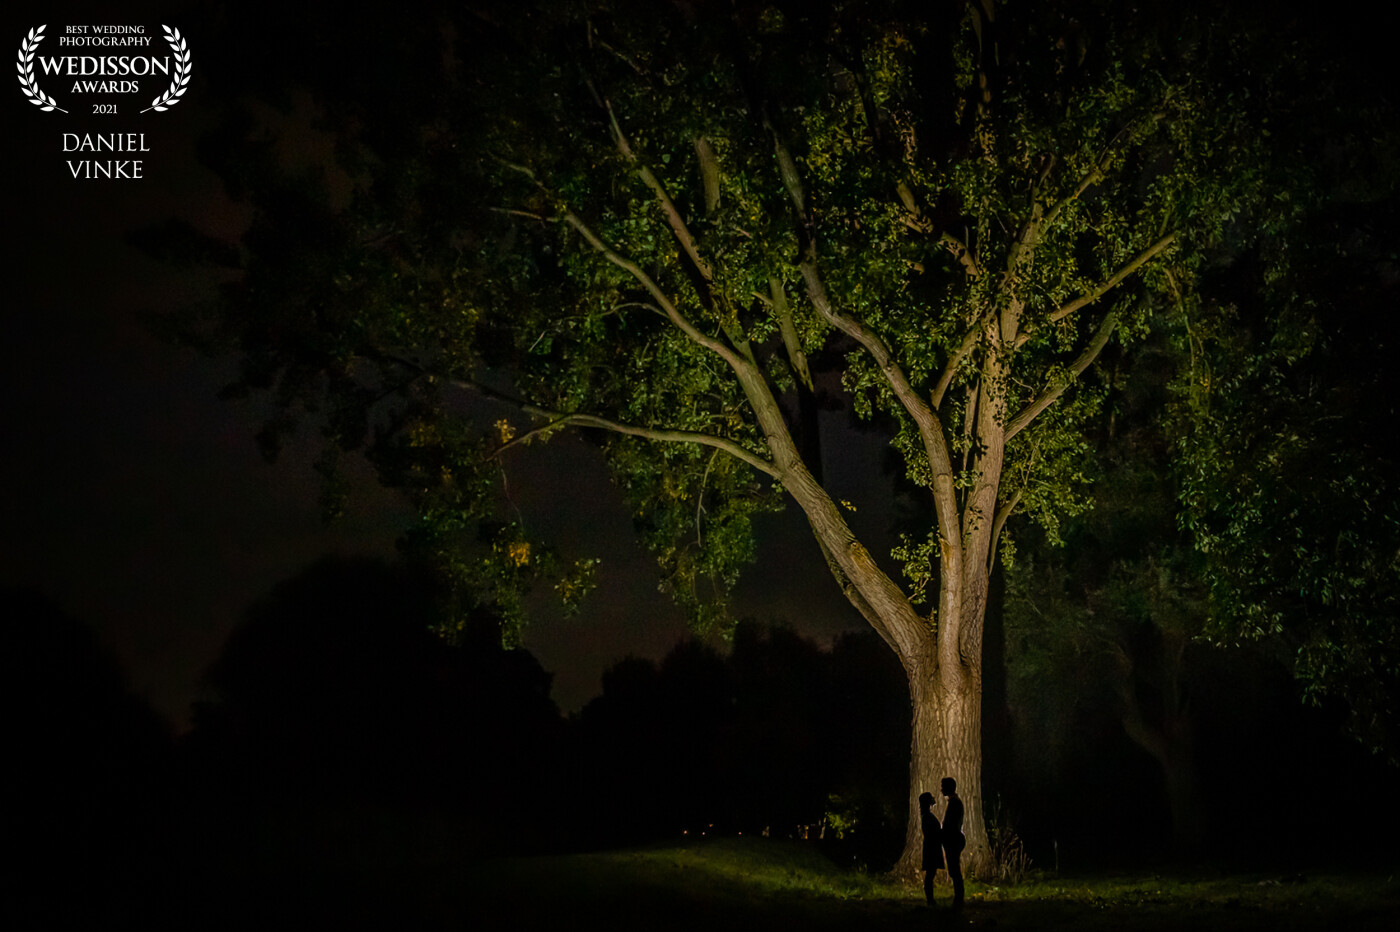 There are not a lot of big trees where I live. This is the only one I know in Schiedam. Lit up the tree with an AD200PRO and the couple made a nice silhouette in front of the flash. Turned out great!